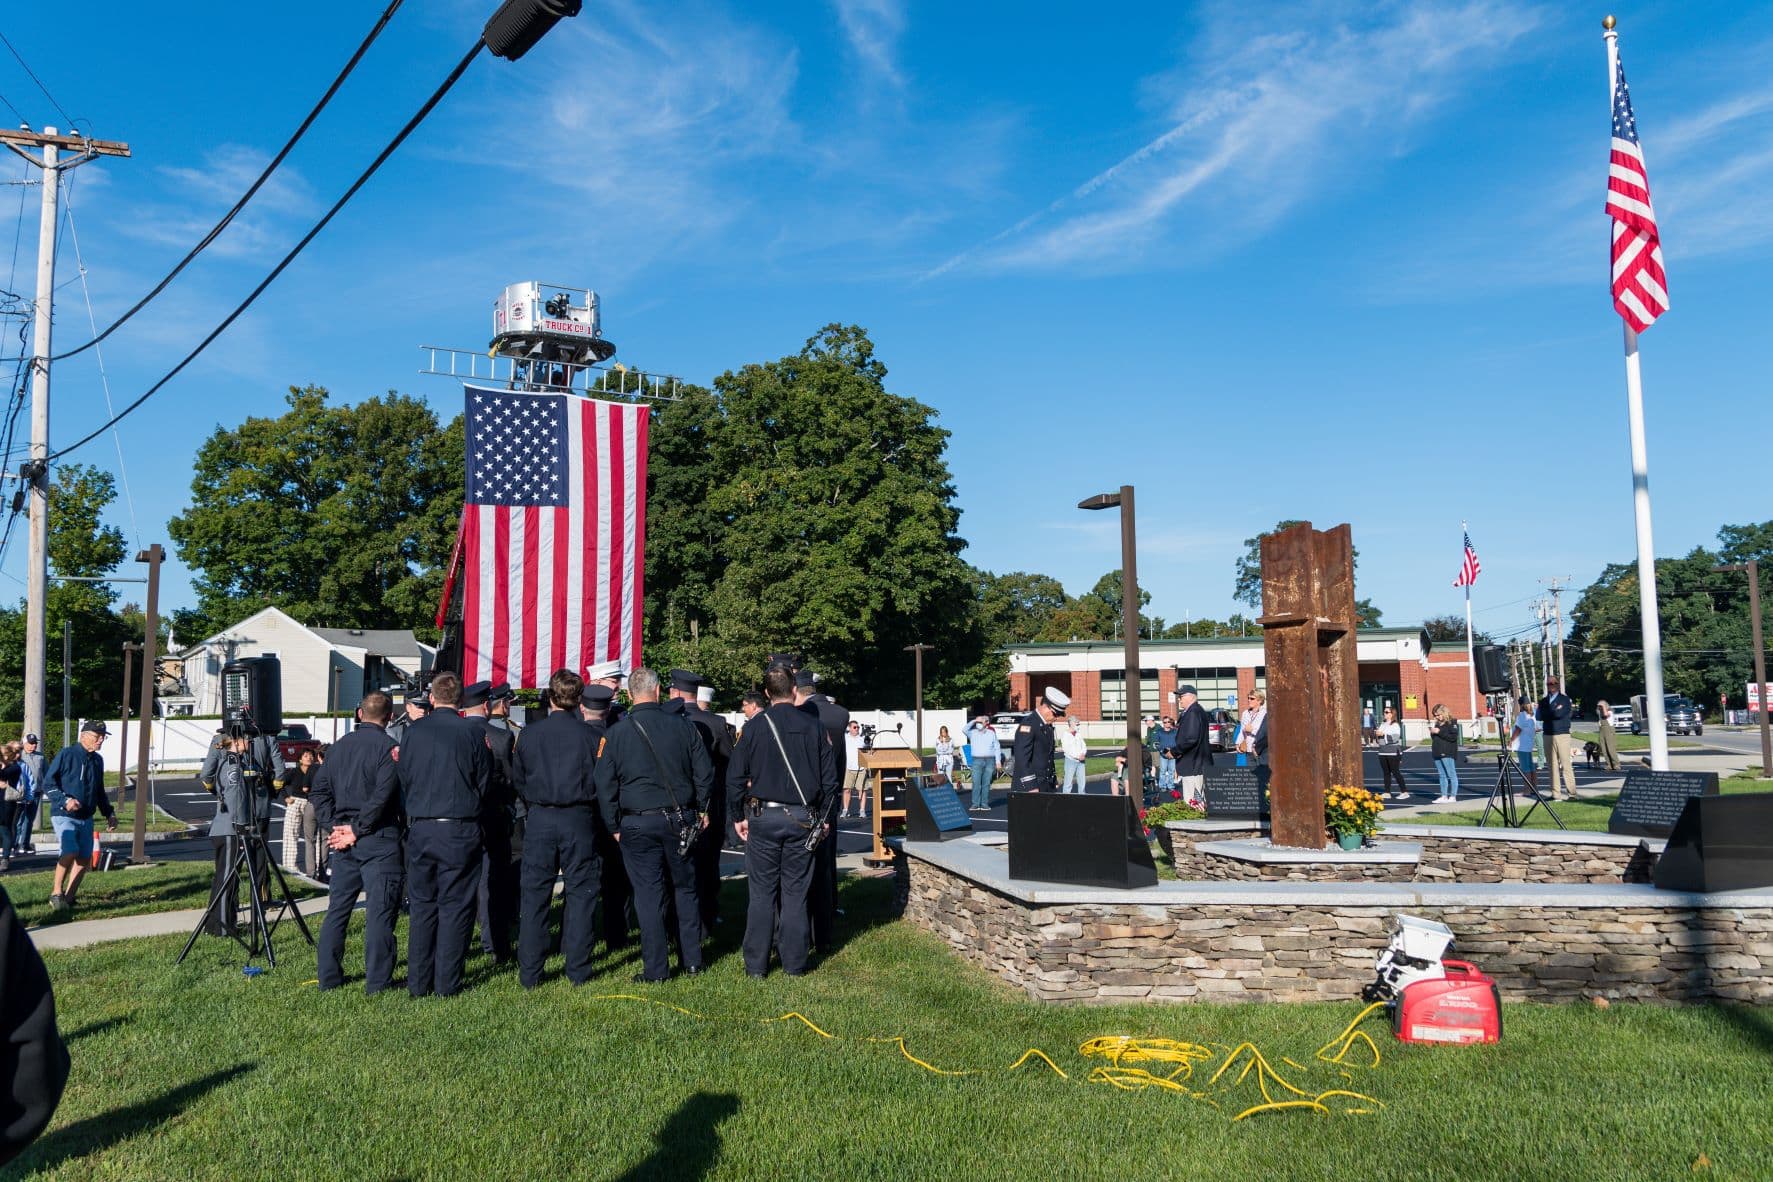 Church bells punctuate 9/11 Anniversary ceremony in Westborough